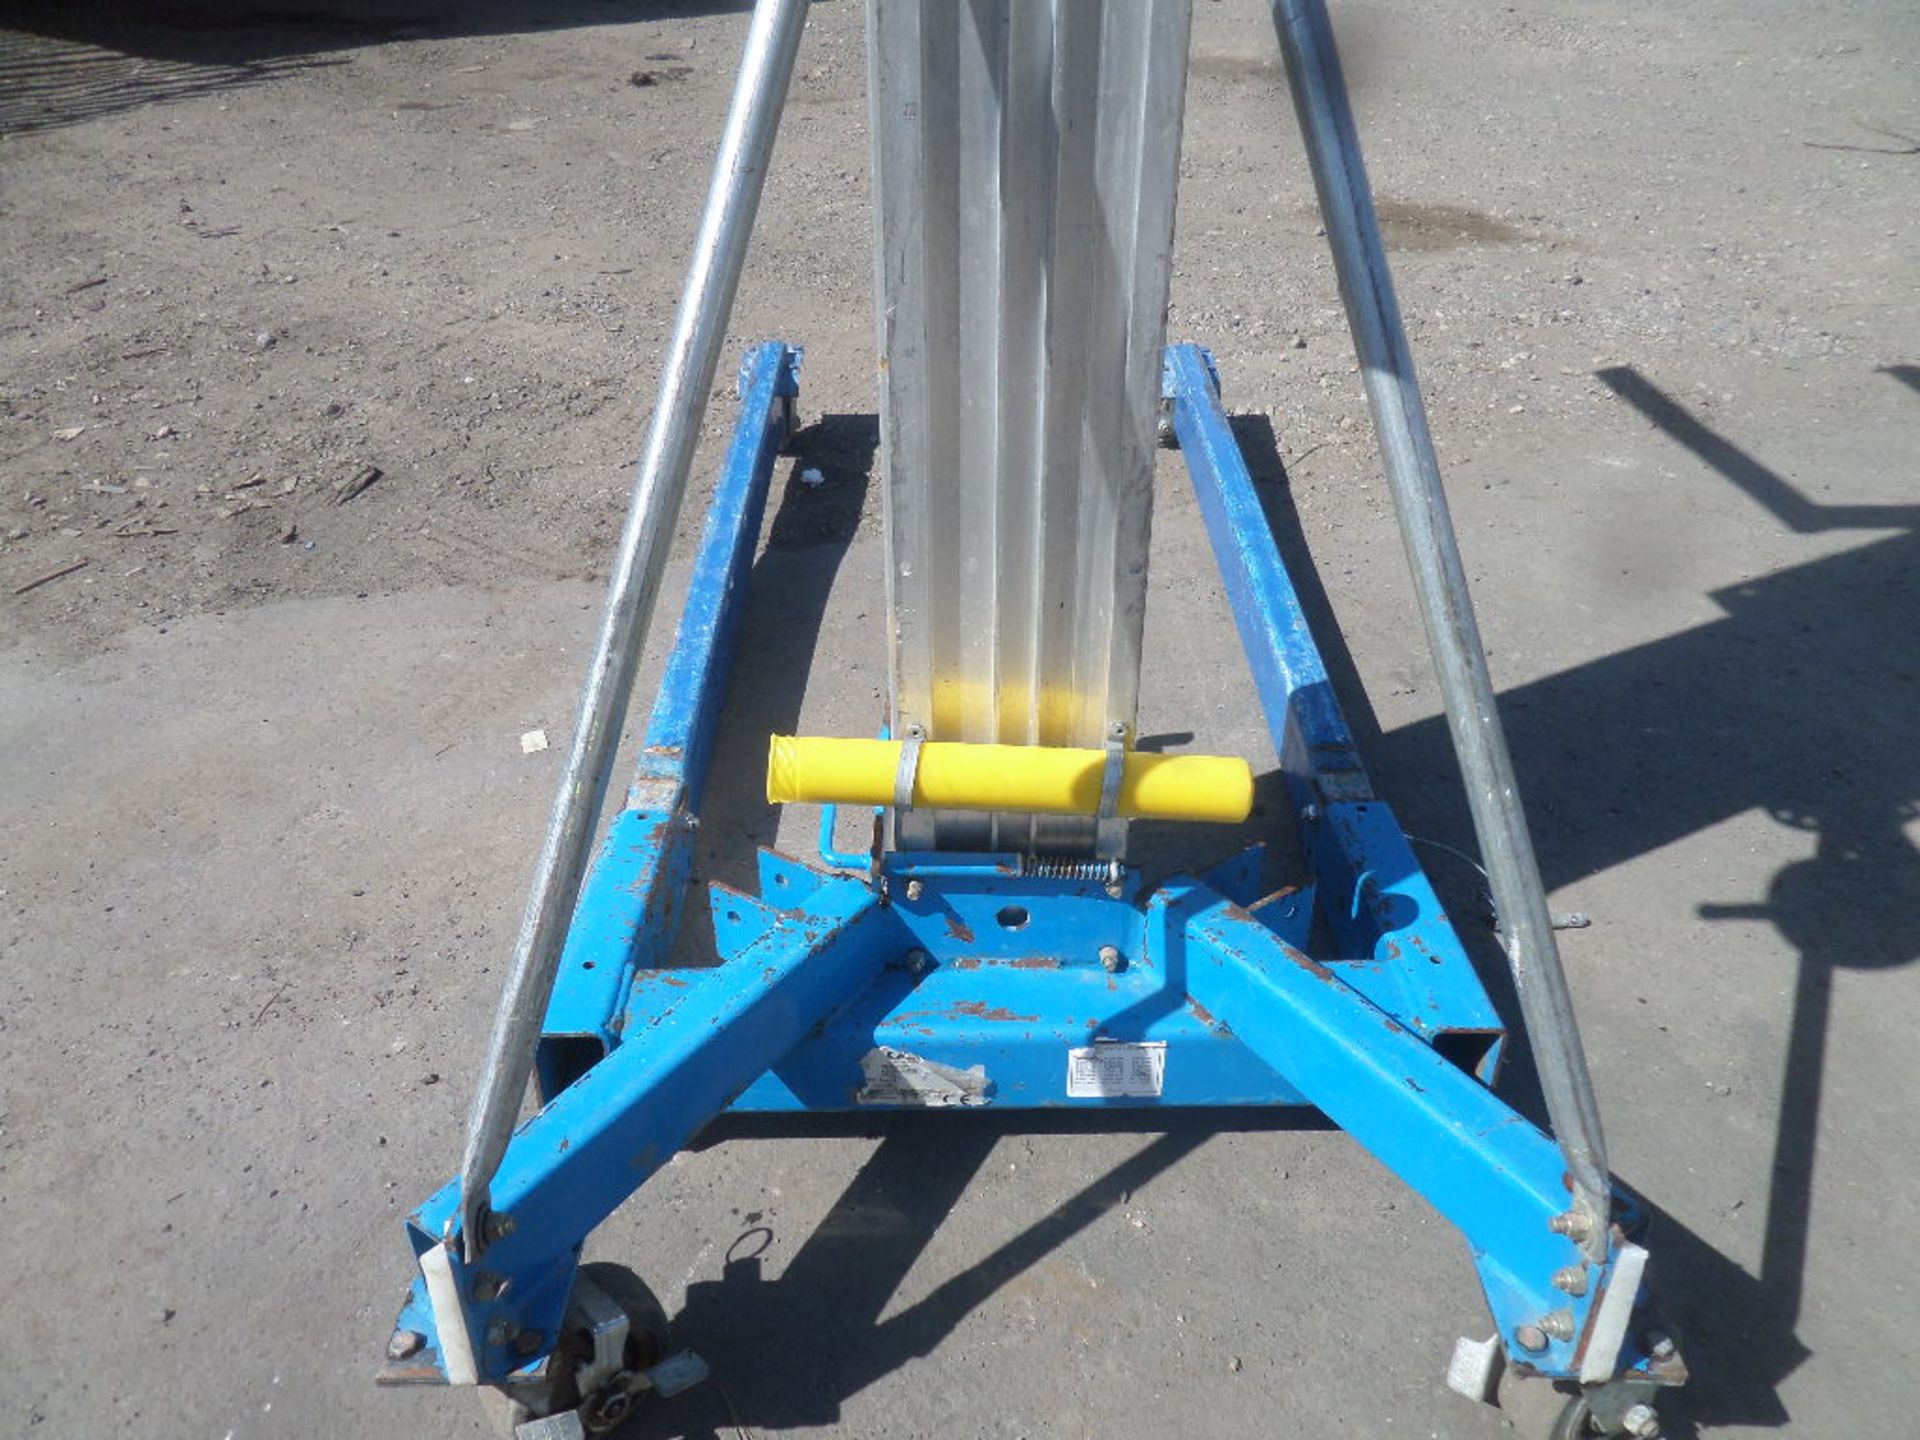 GENIE SUPERLIFT ADVANTAGE SLA 15 {027268} 363KG LIFTER/STACKER MANUAL Max load it can carry is 363kg - Image 2 of 4